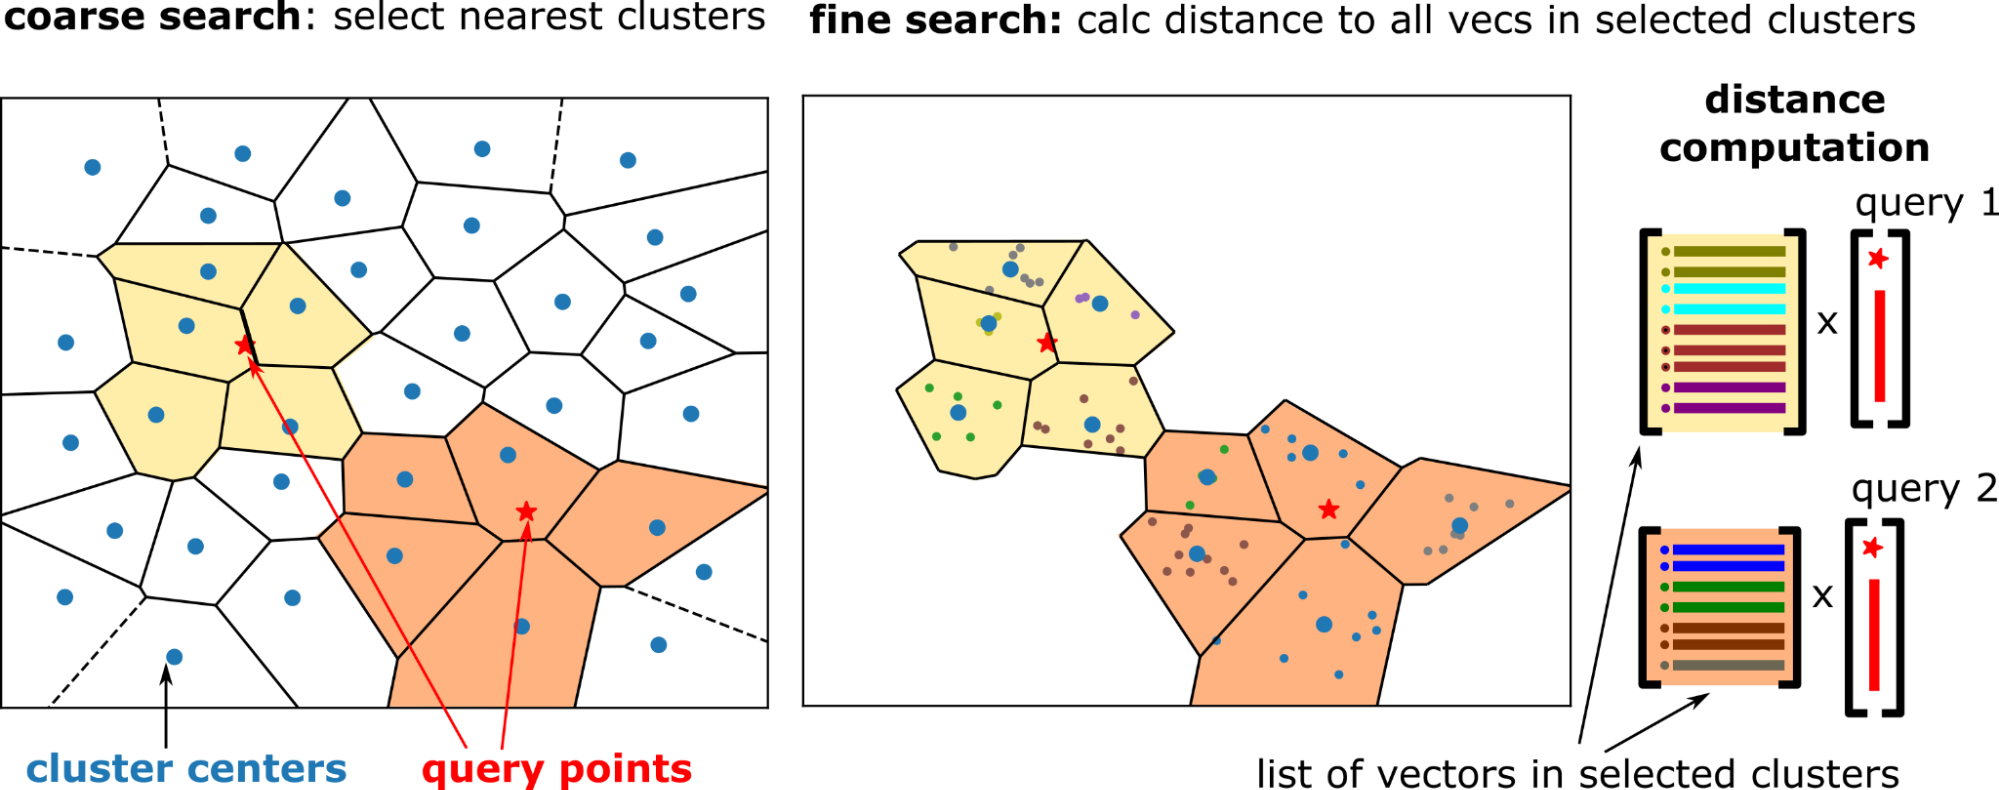 Diagram of clusters represented by their centers with the clusters highlighted that are closest to the queries. Selected clusters shown with the individual points within these clusters.